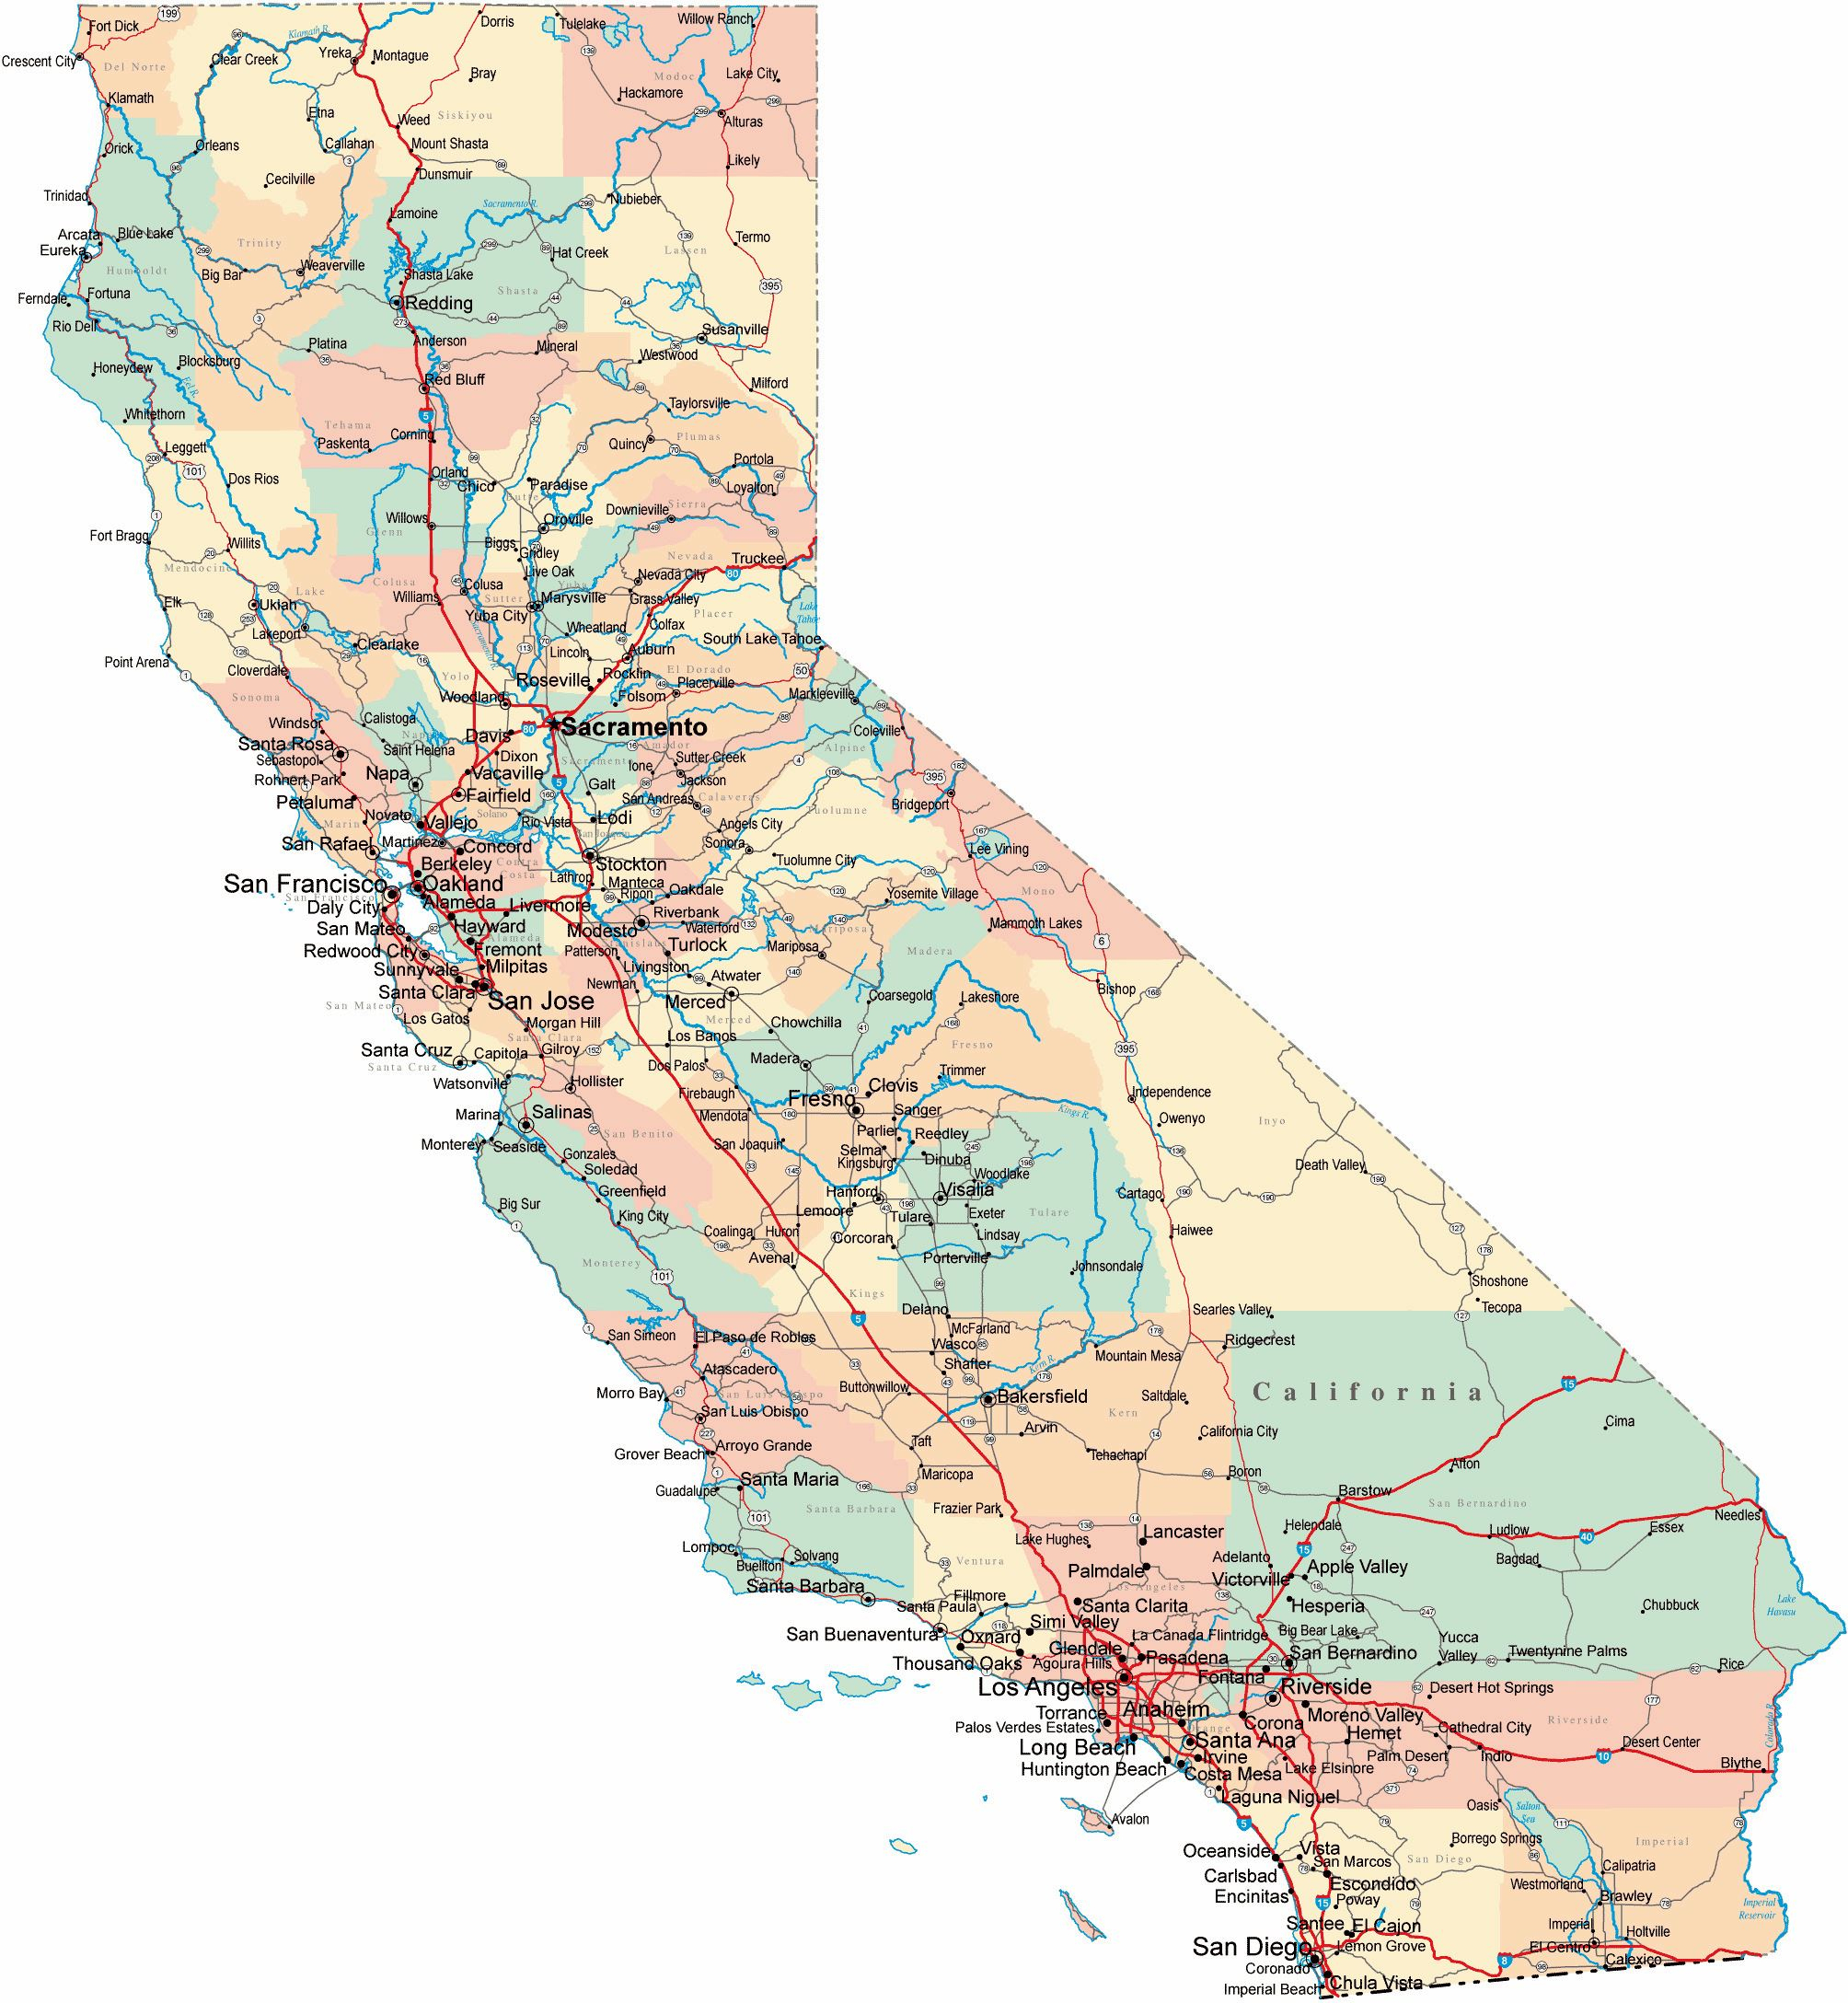 Large California Maps For Free Download And Print | High-Resolution - Printable Road Map Of California